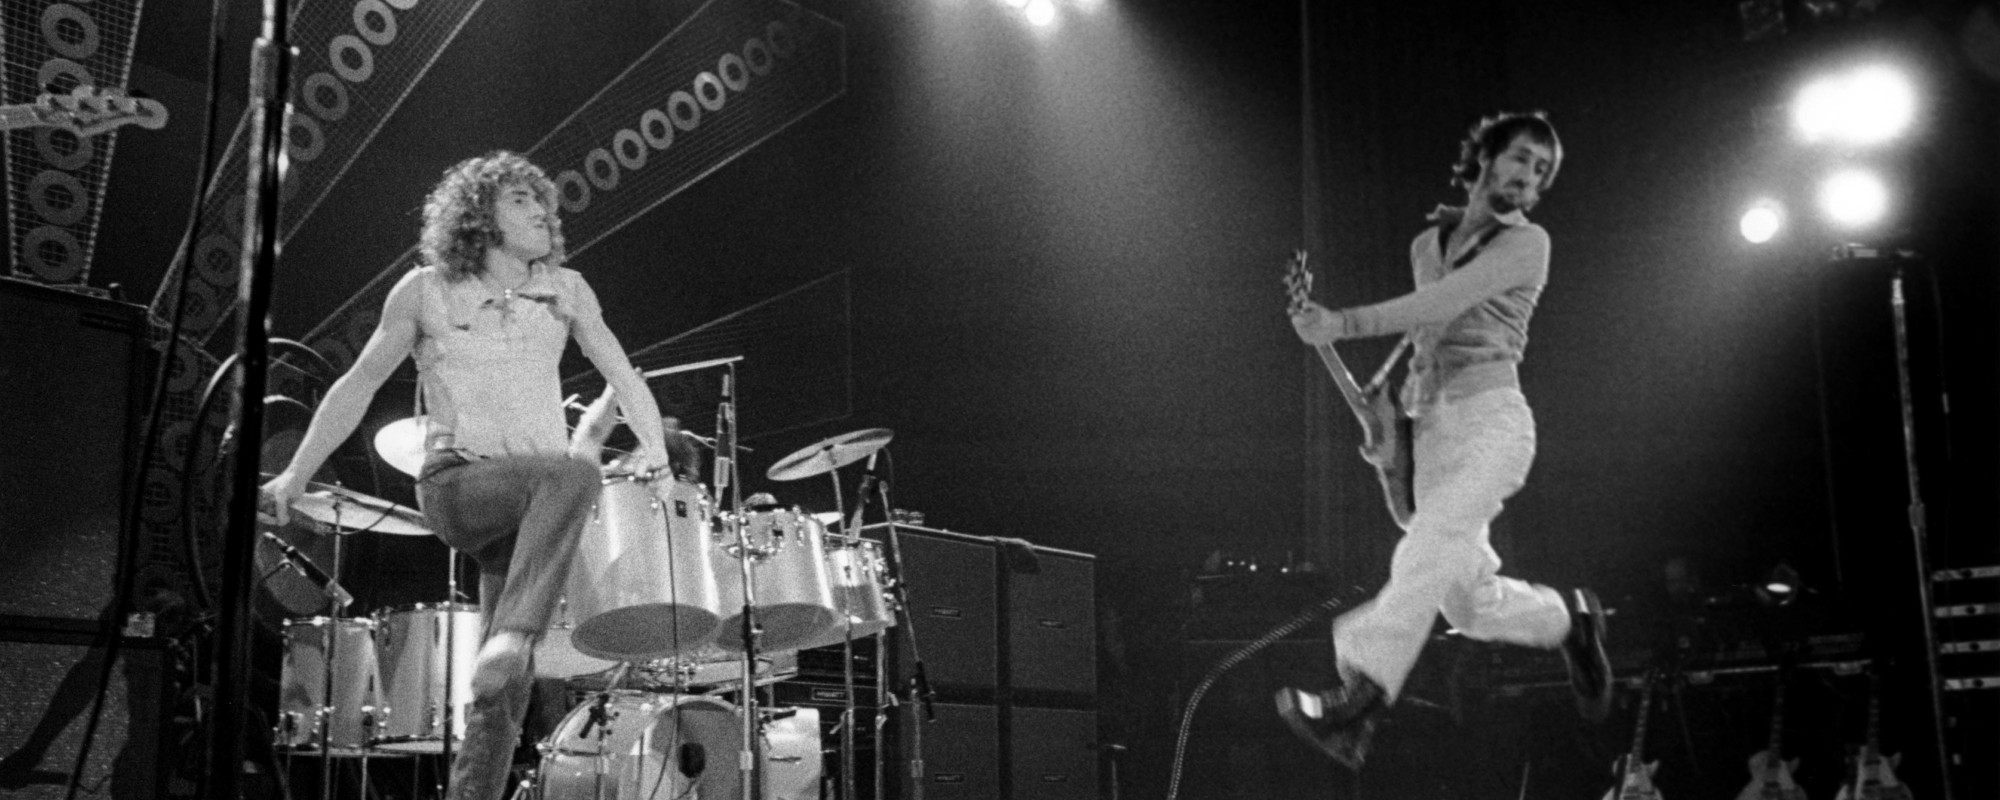 Four Personalities Rolled into One: The Story Behind “5:15” by The Who